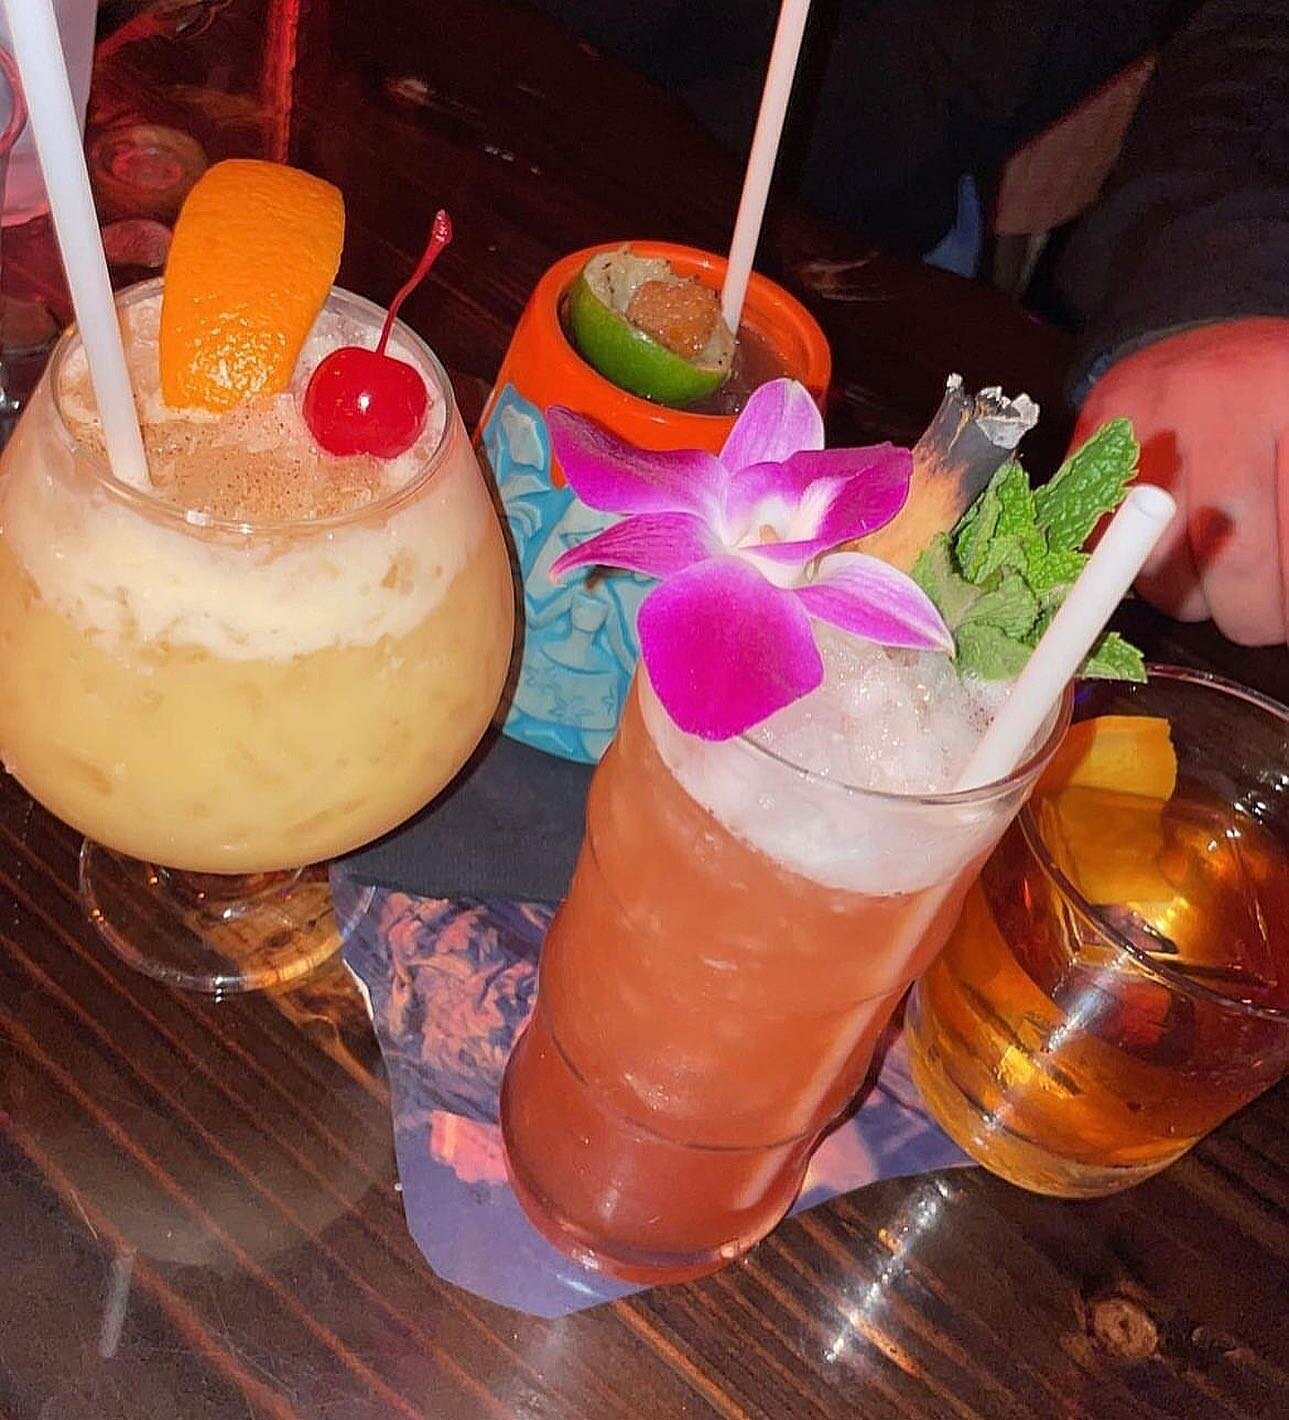 Looking for a fun spot to bring out of towners this summer? 🍹 Look no further! We have drinks for everyone.

📸 PC: @diningwithkj 

&bull; 
Visit our sibling speakeasy bar upstairs - Momoku No Usagi (@MomokuNoUsagi)!
&bull; 
We are currently open We